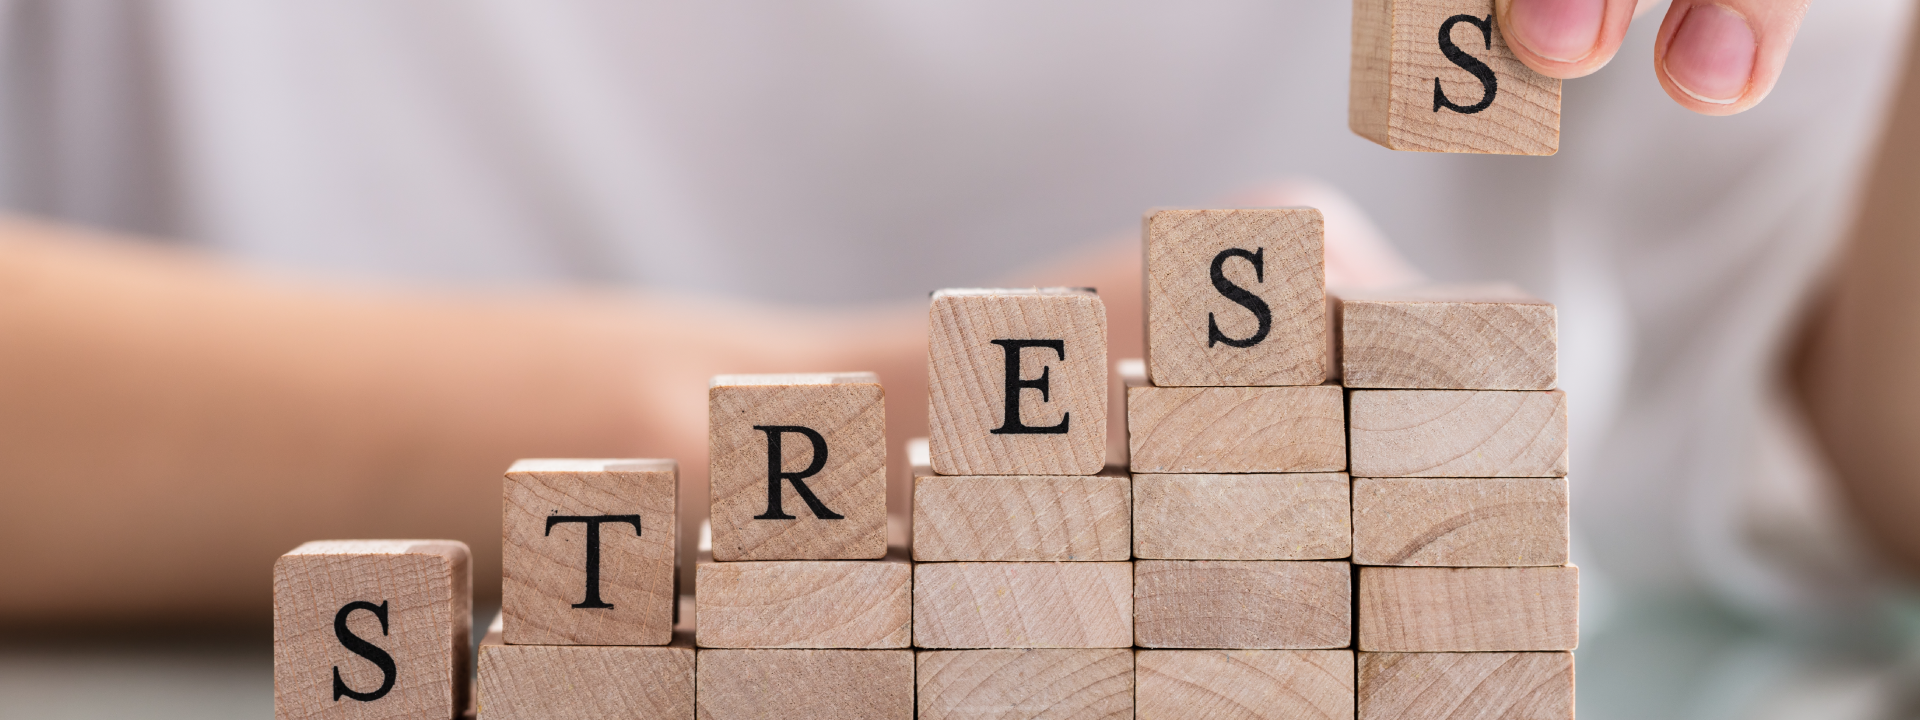 What Causes Stress?